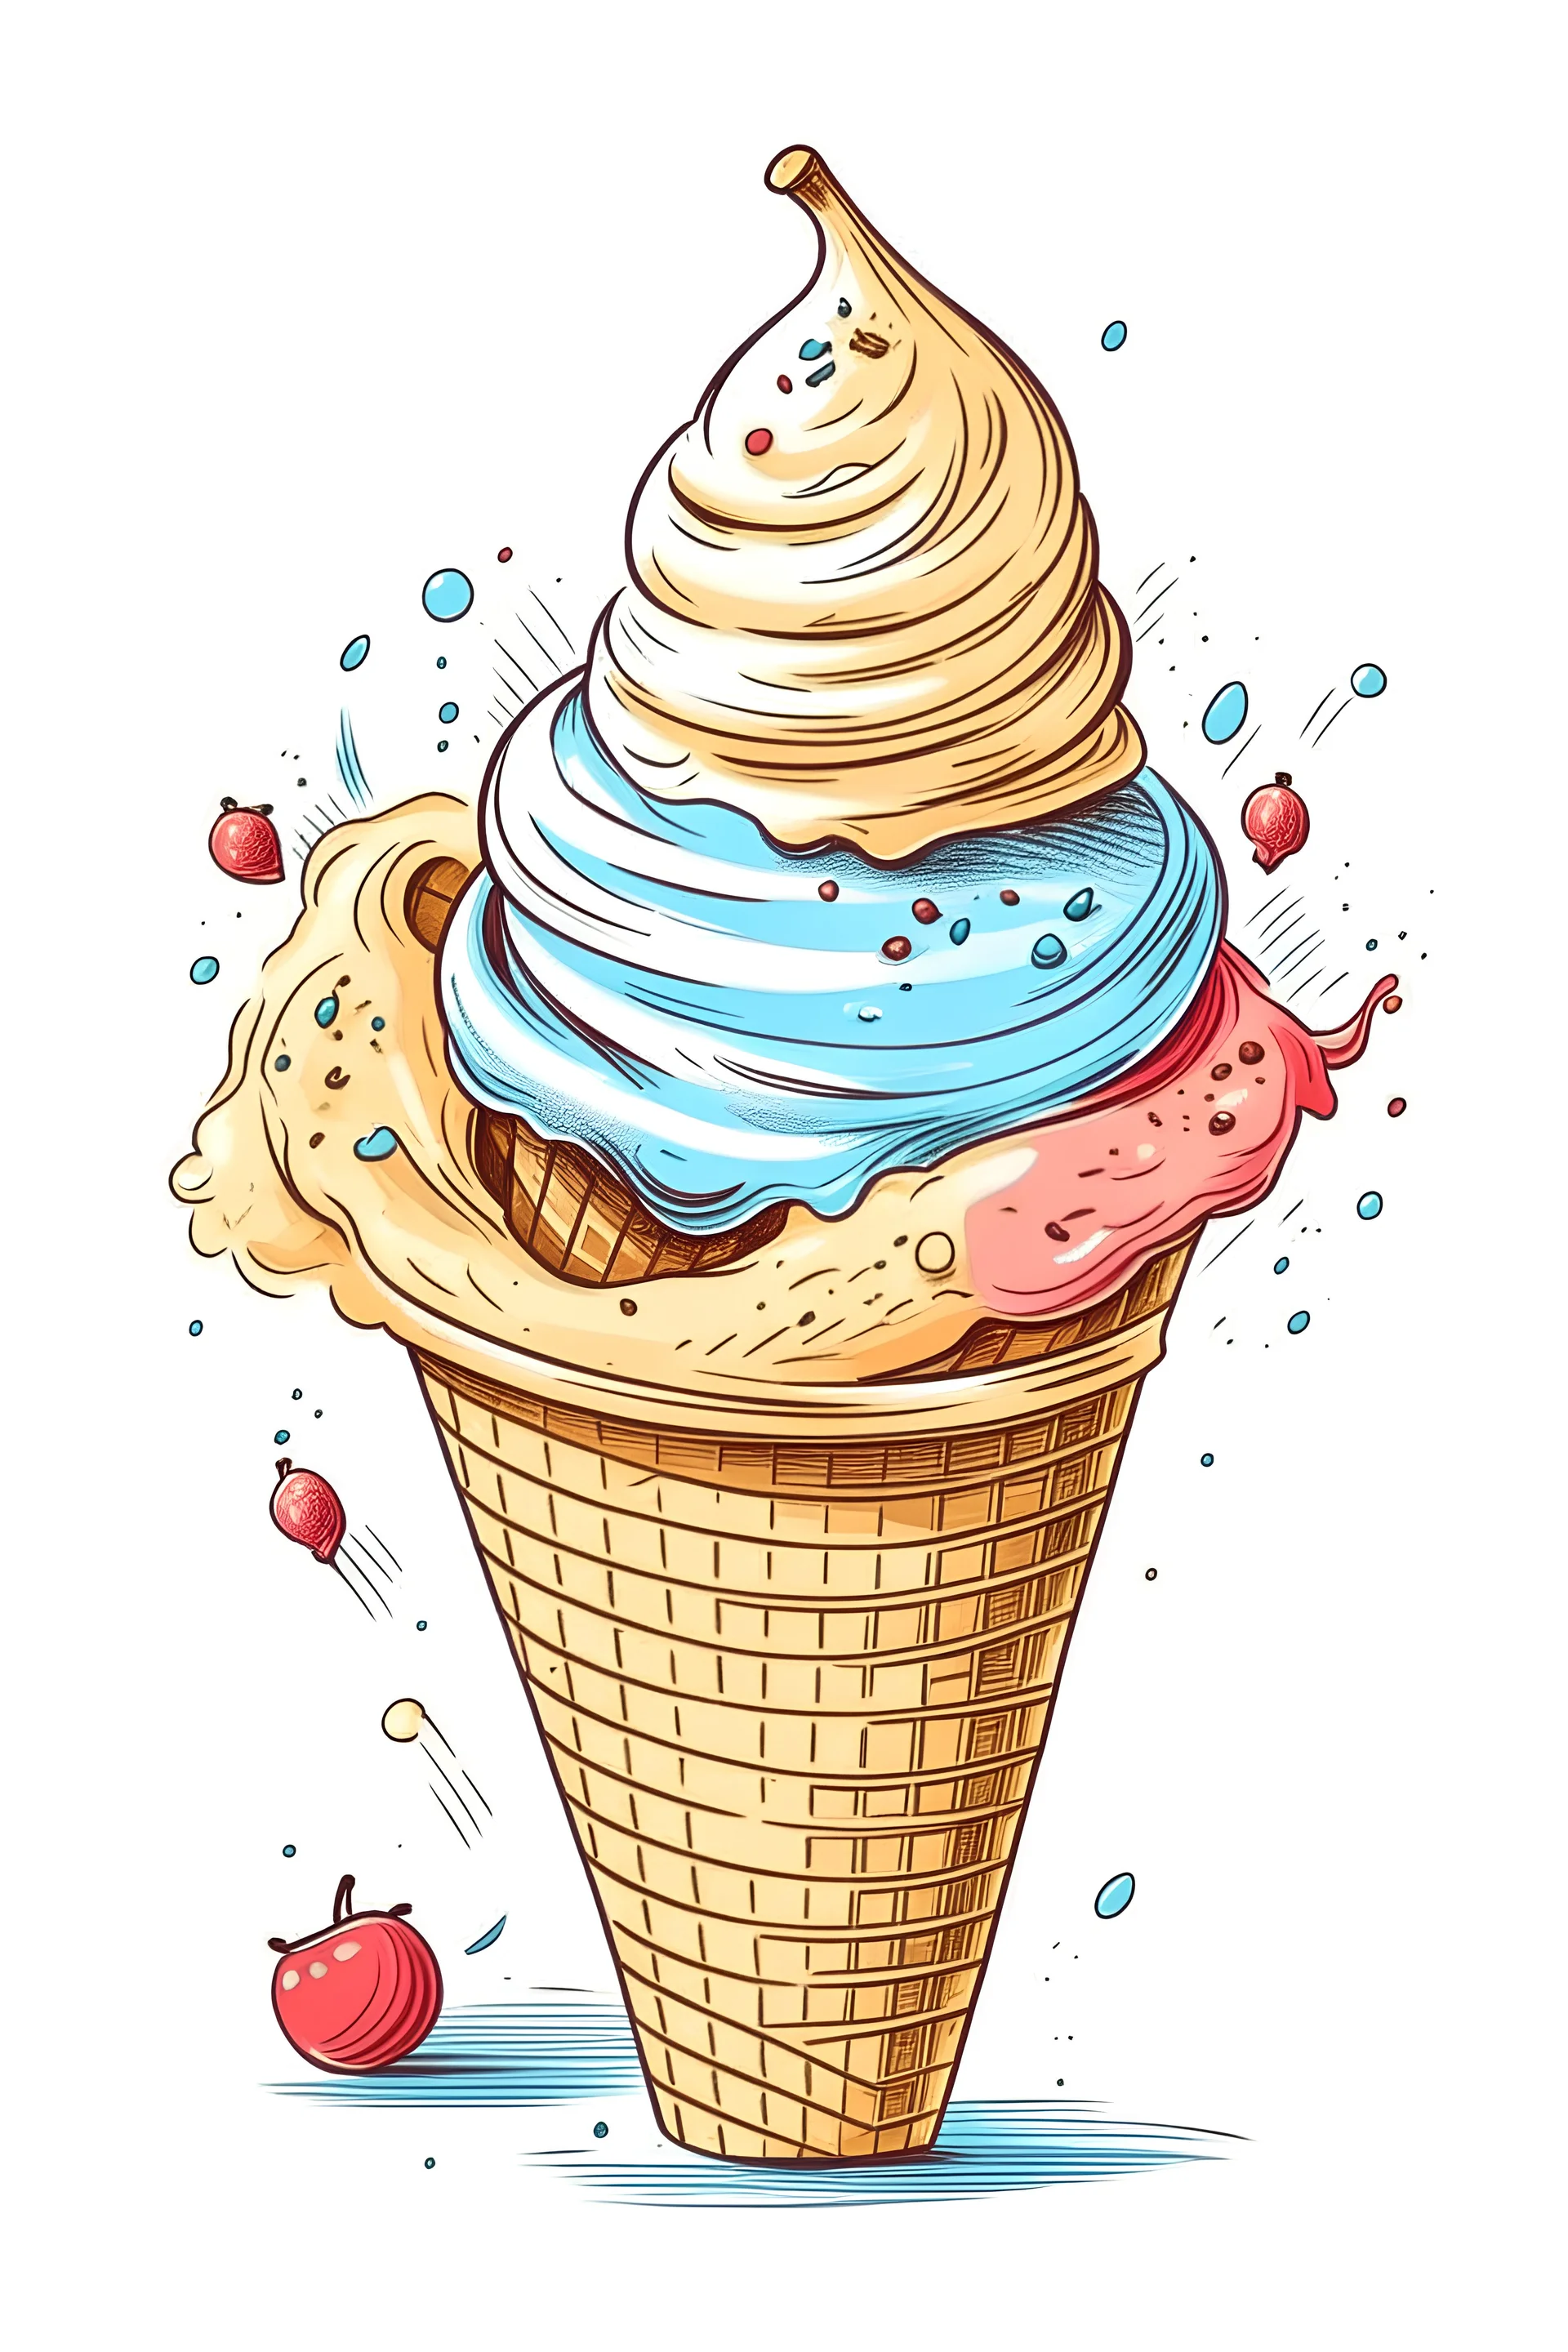 How To Draw An Ice Cream - Kawaii - Easy Step By Step Guide